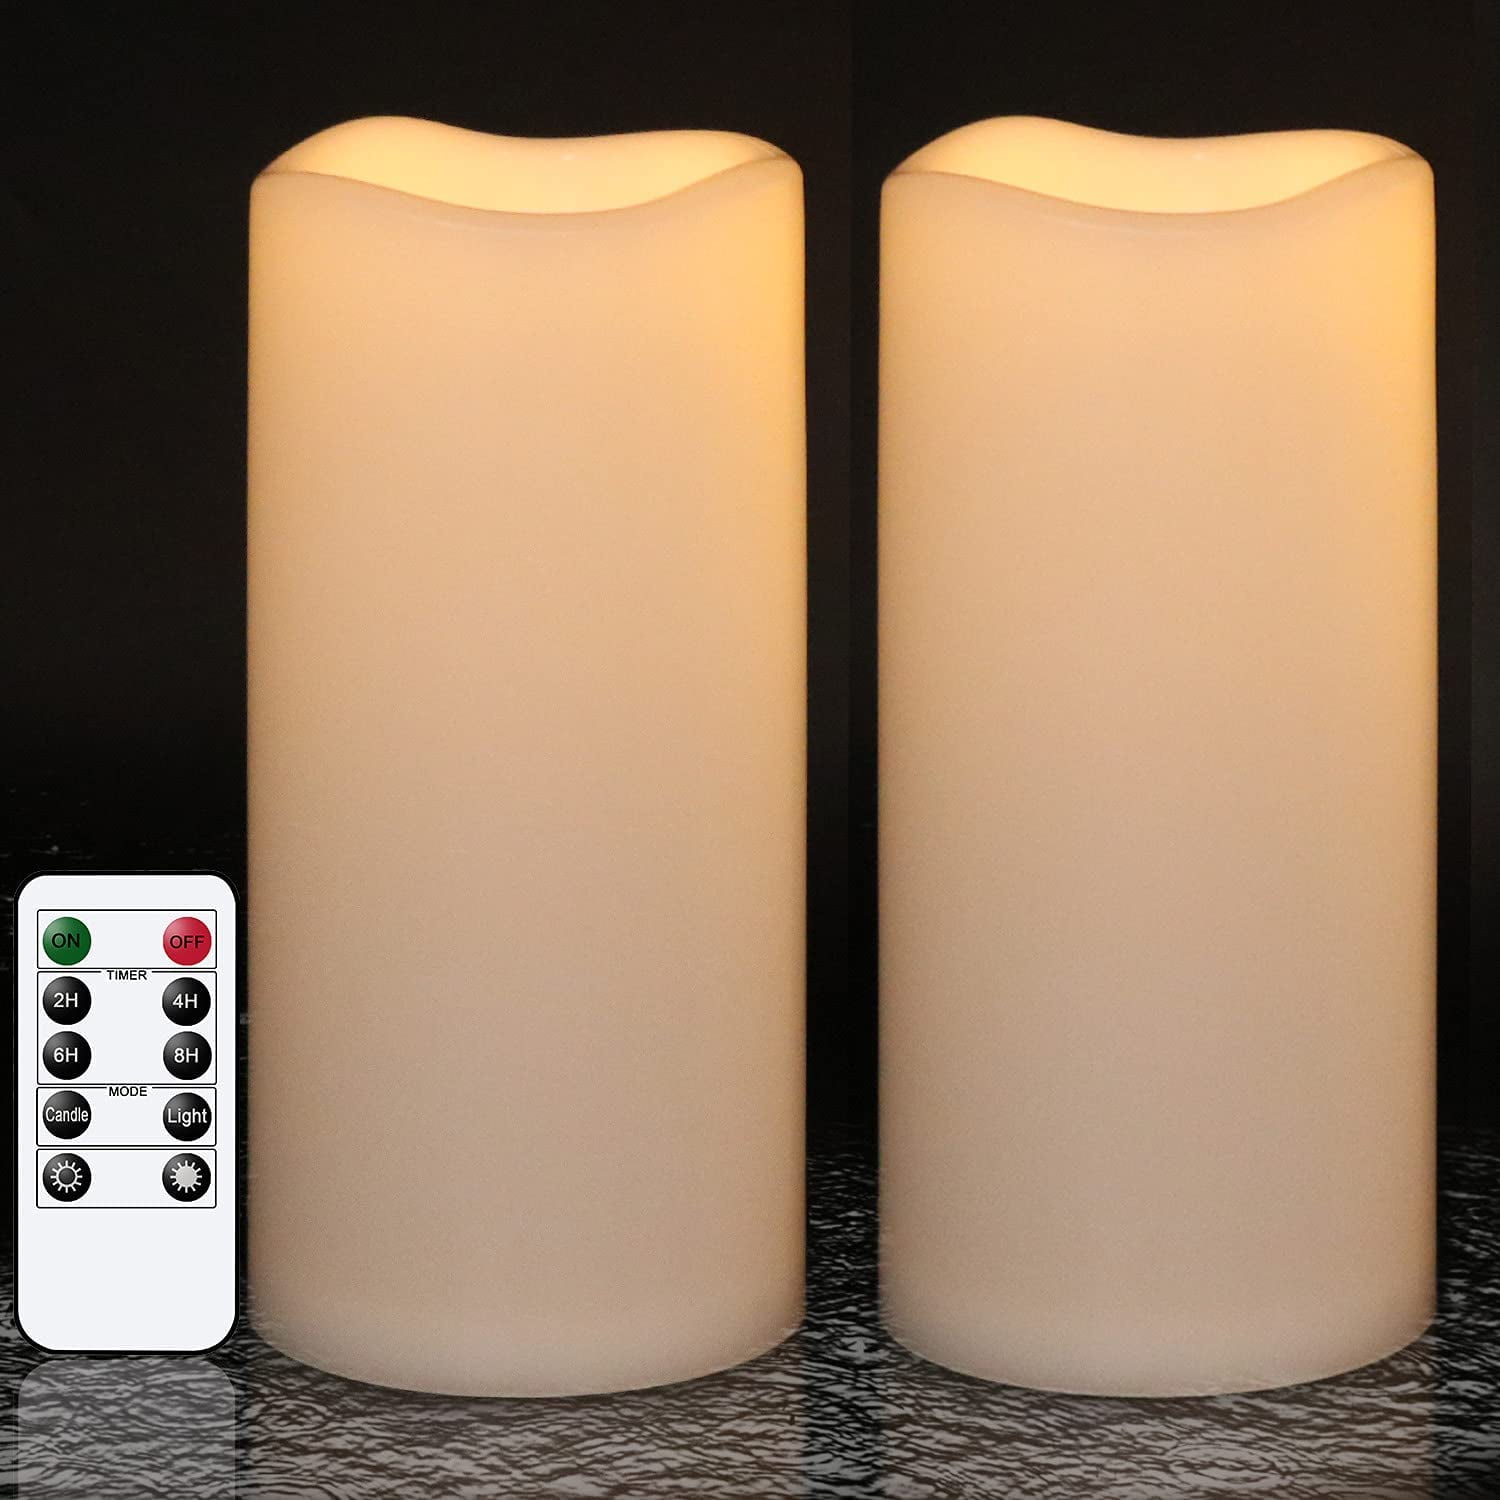 Made of Plastic Wont Melt REMOTE Outdoor Flameless Battery LED Pillar Candles Weather Resistant Design 3 x 4 Set of 3 